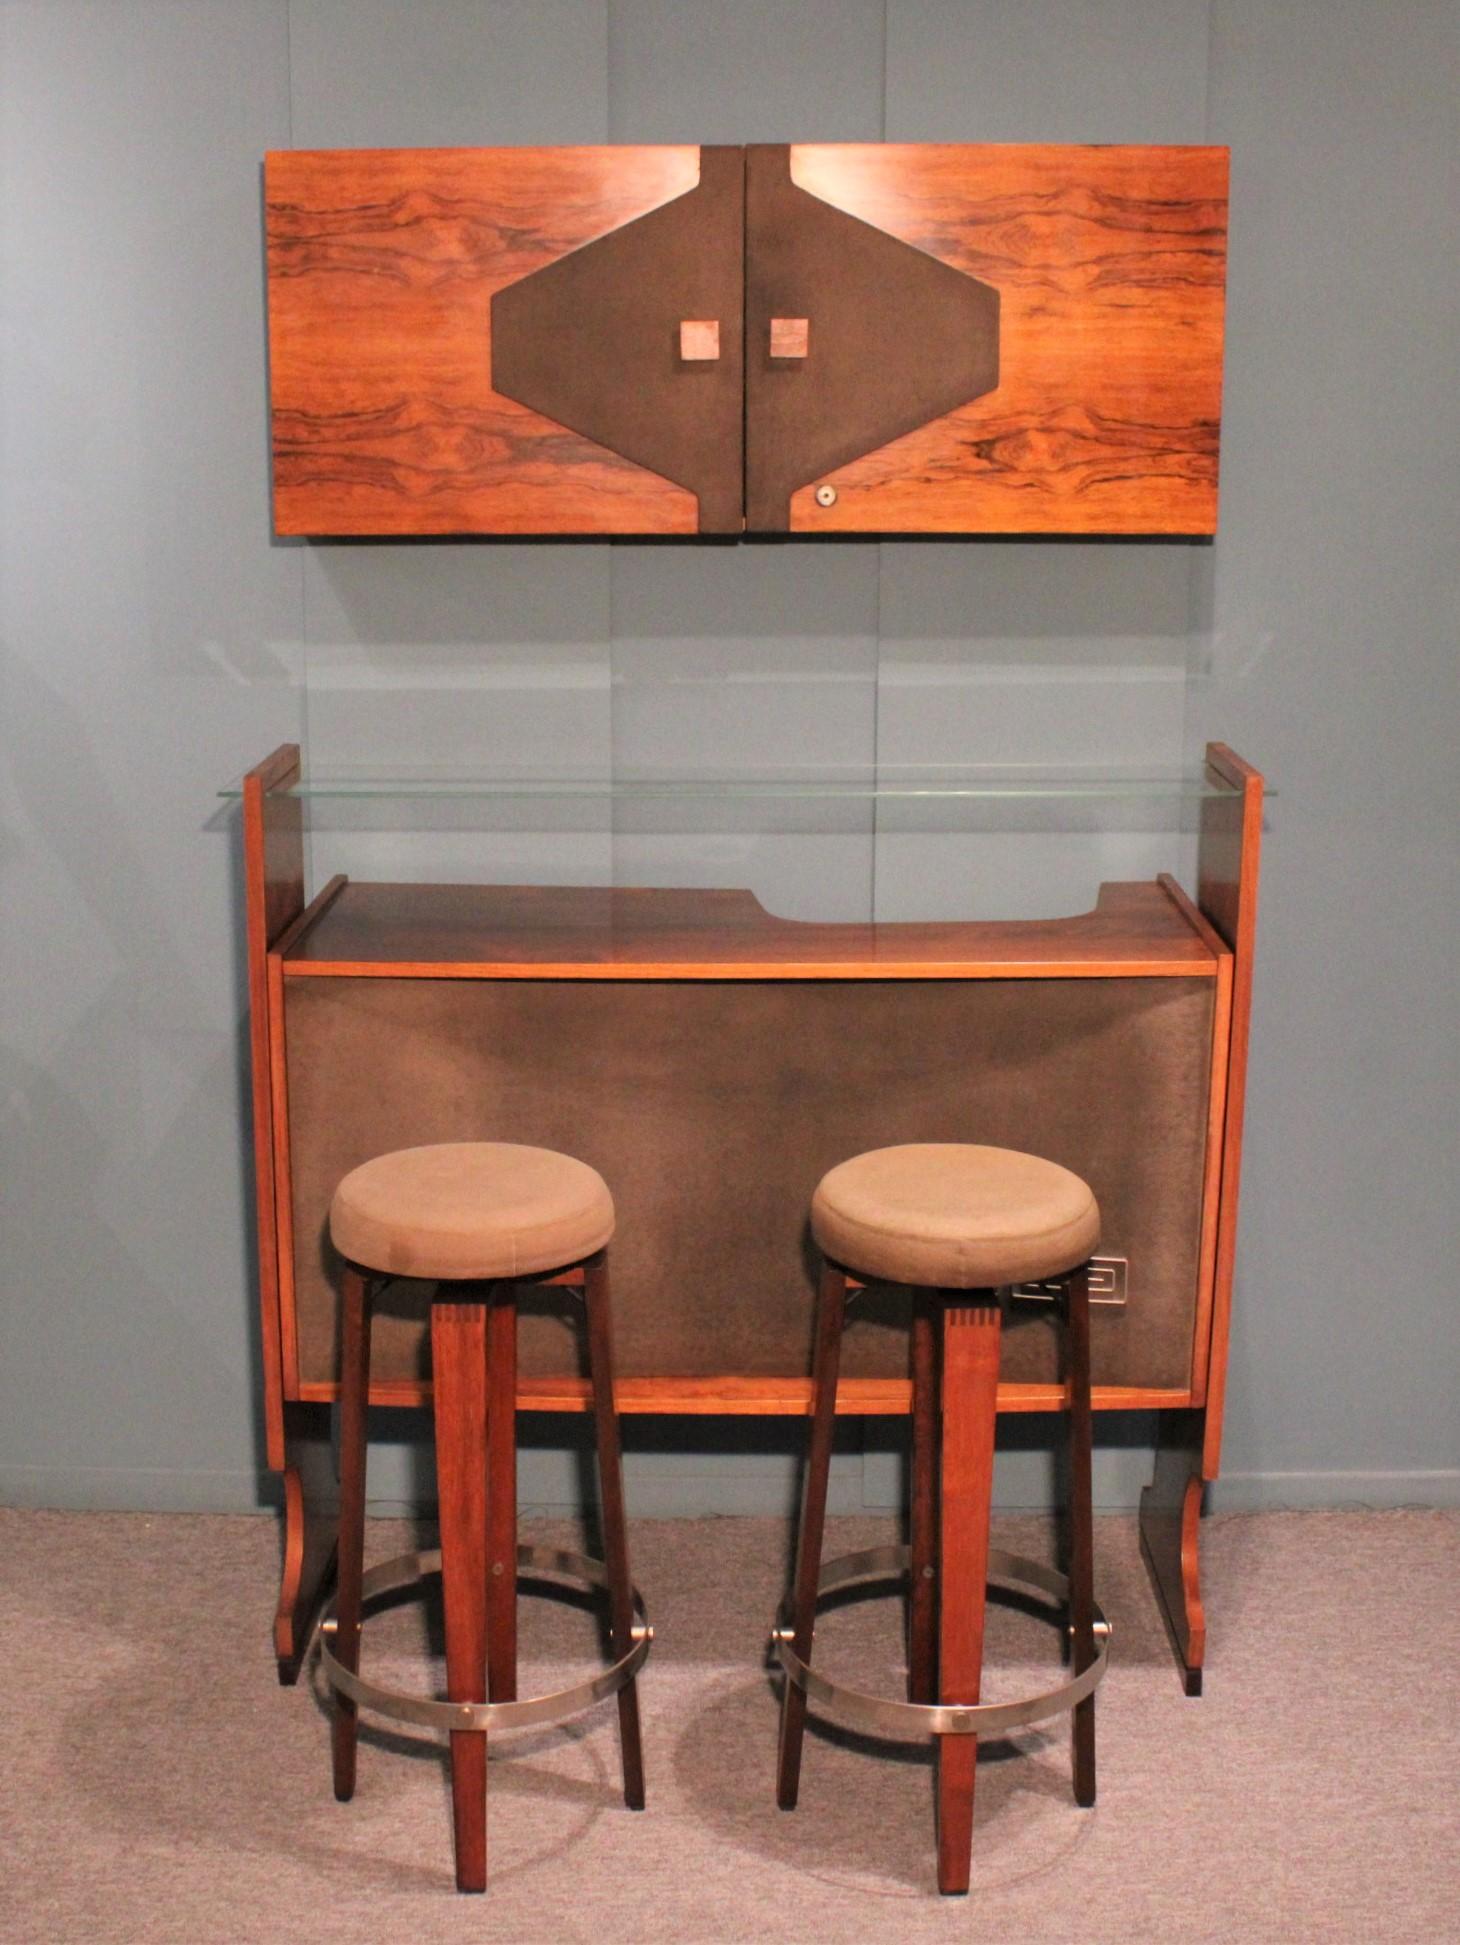 Vintage bar and stools set, Italian work circa 1960.
Set of 1 bar, 2 stools and 1 wall cabinet. In rosewood.
Stools : height 76 x diam 37 cm x seat diam 30 cm
Bar : height 115 x lenght 120 x depth 45 cm
Wall cabinet : height 46 x lenght 115 x